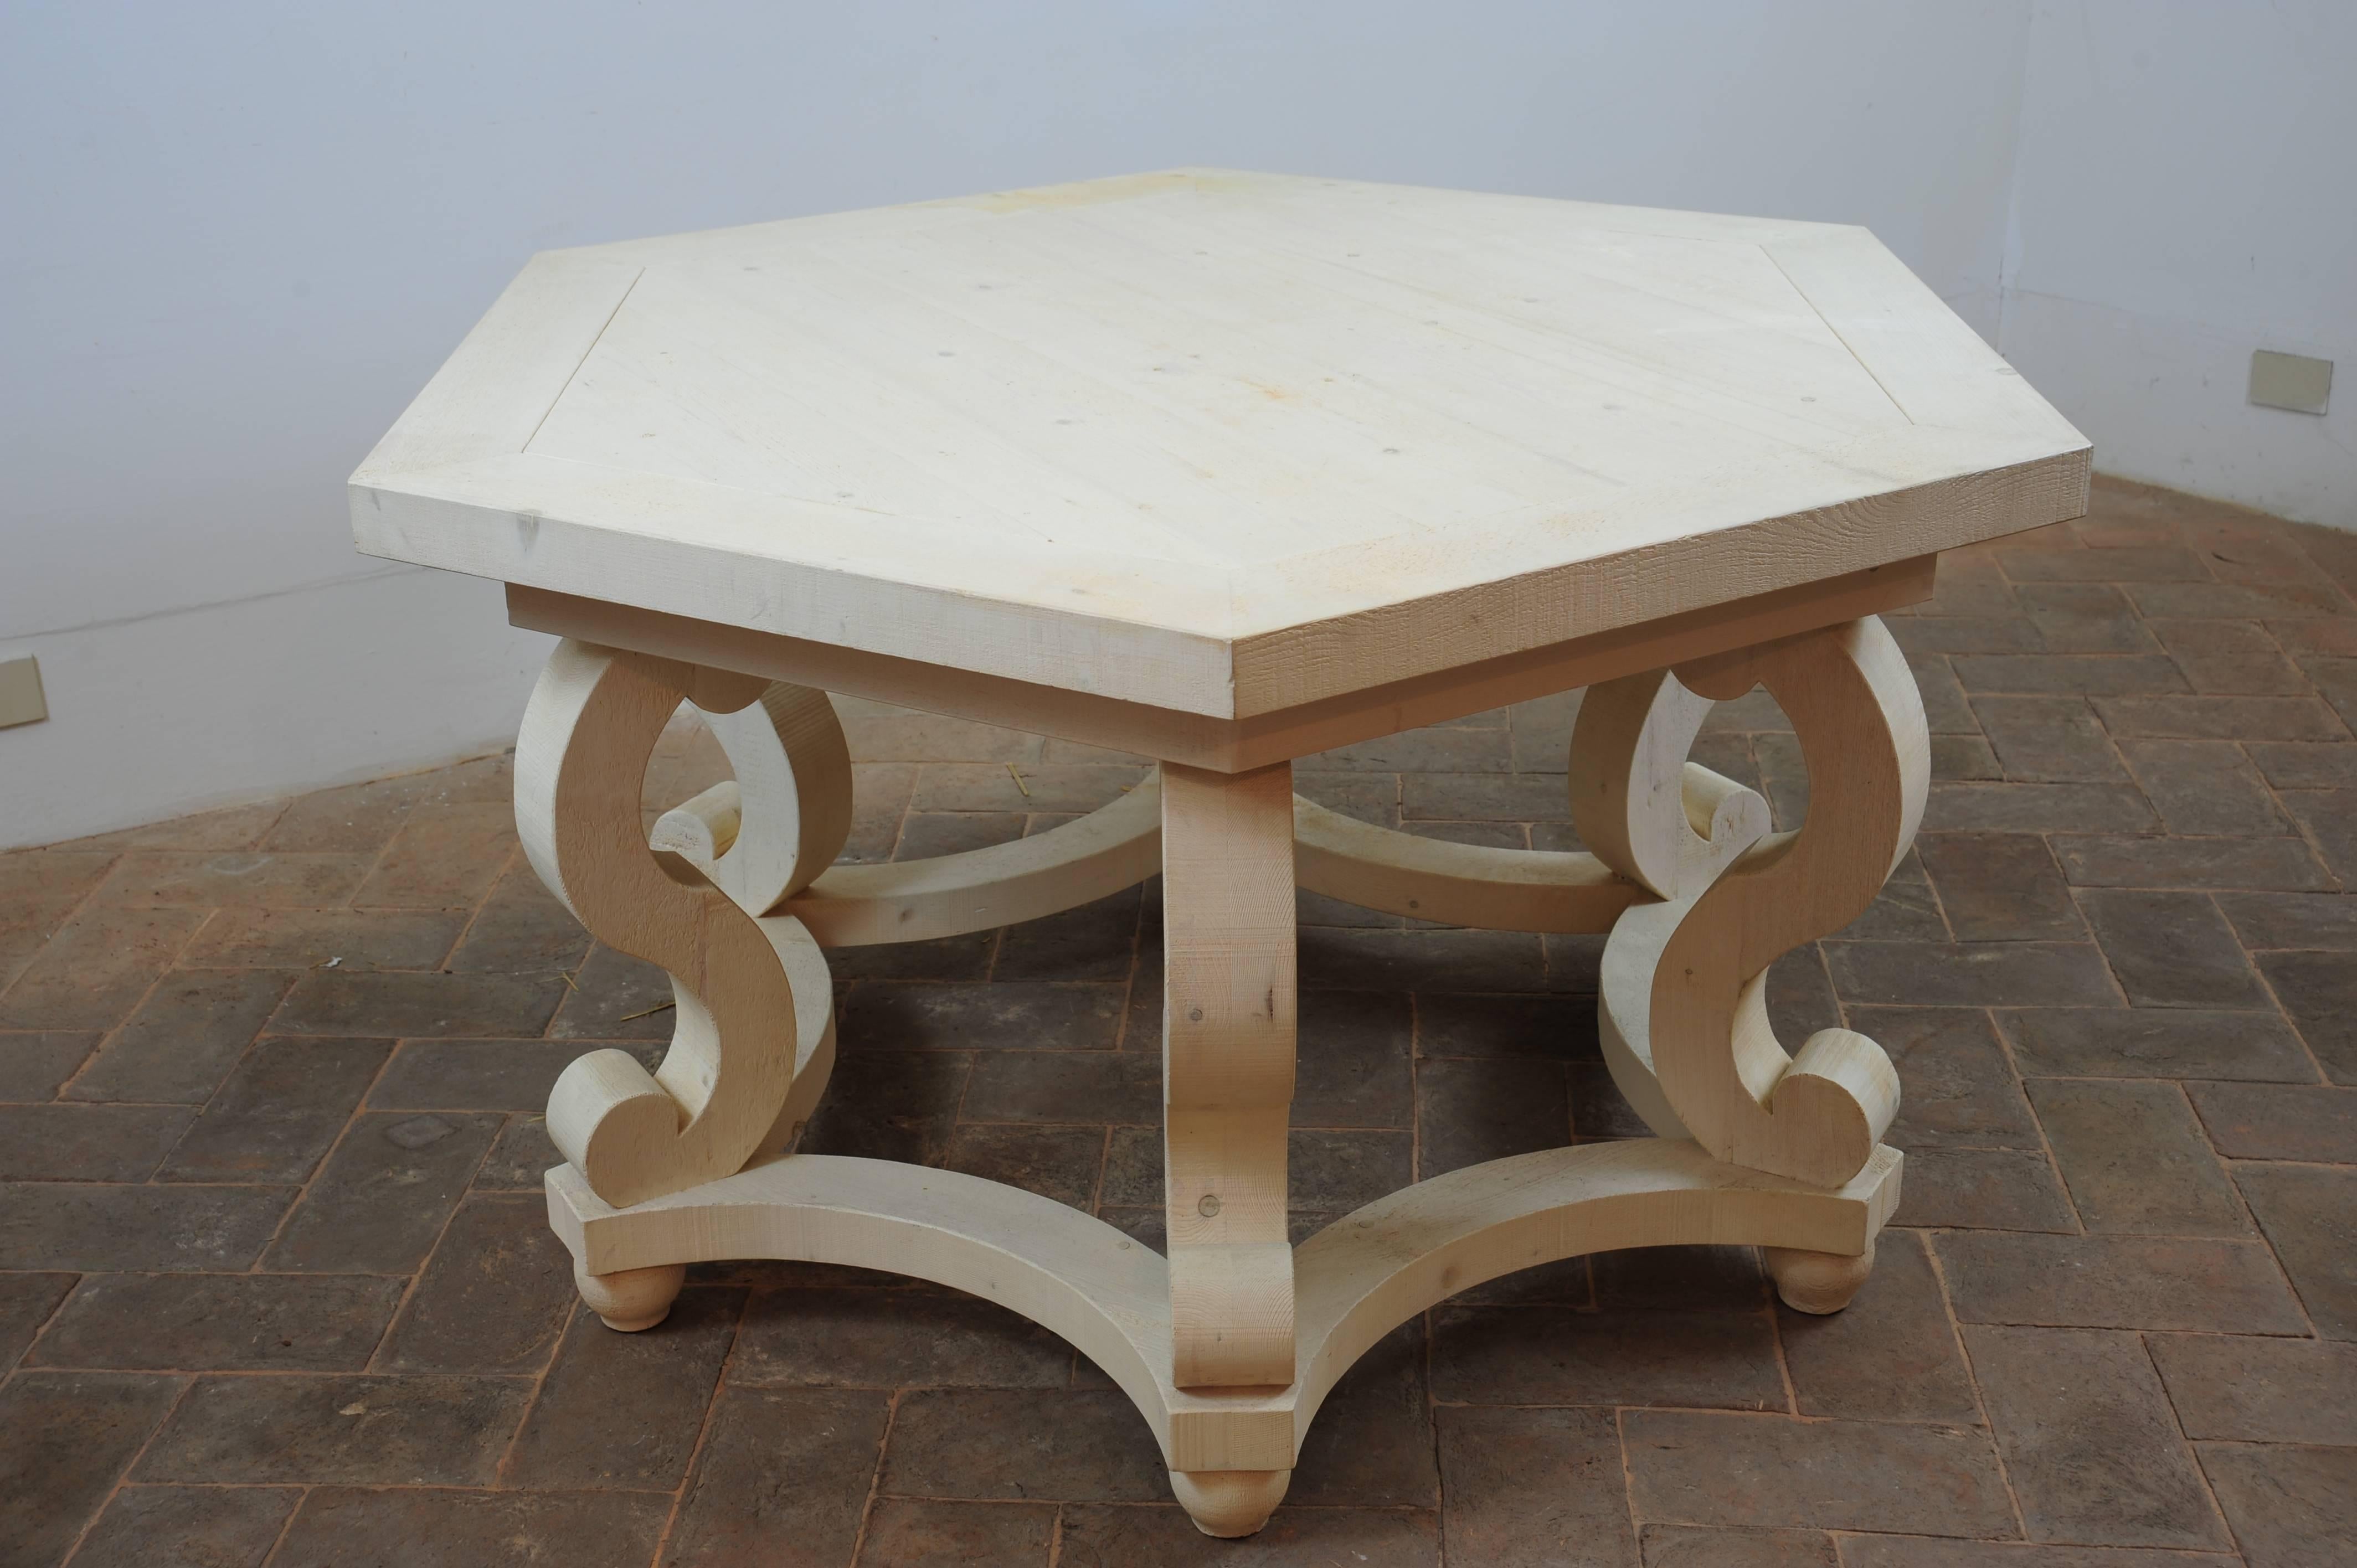 Hexagonal White Fir Wood Table by Michelangeli, Italy In Excellent Condition For Sale In Orvieto, IT